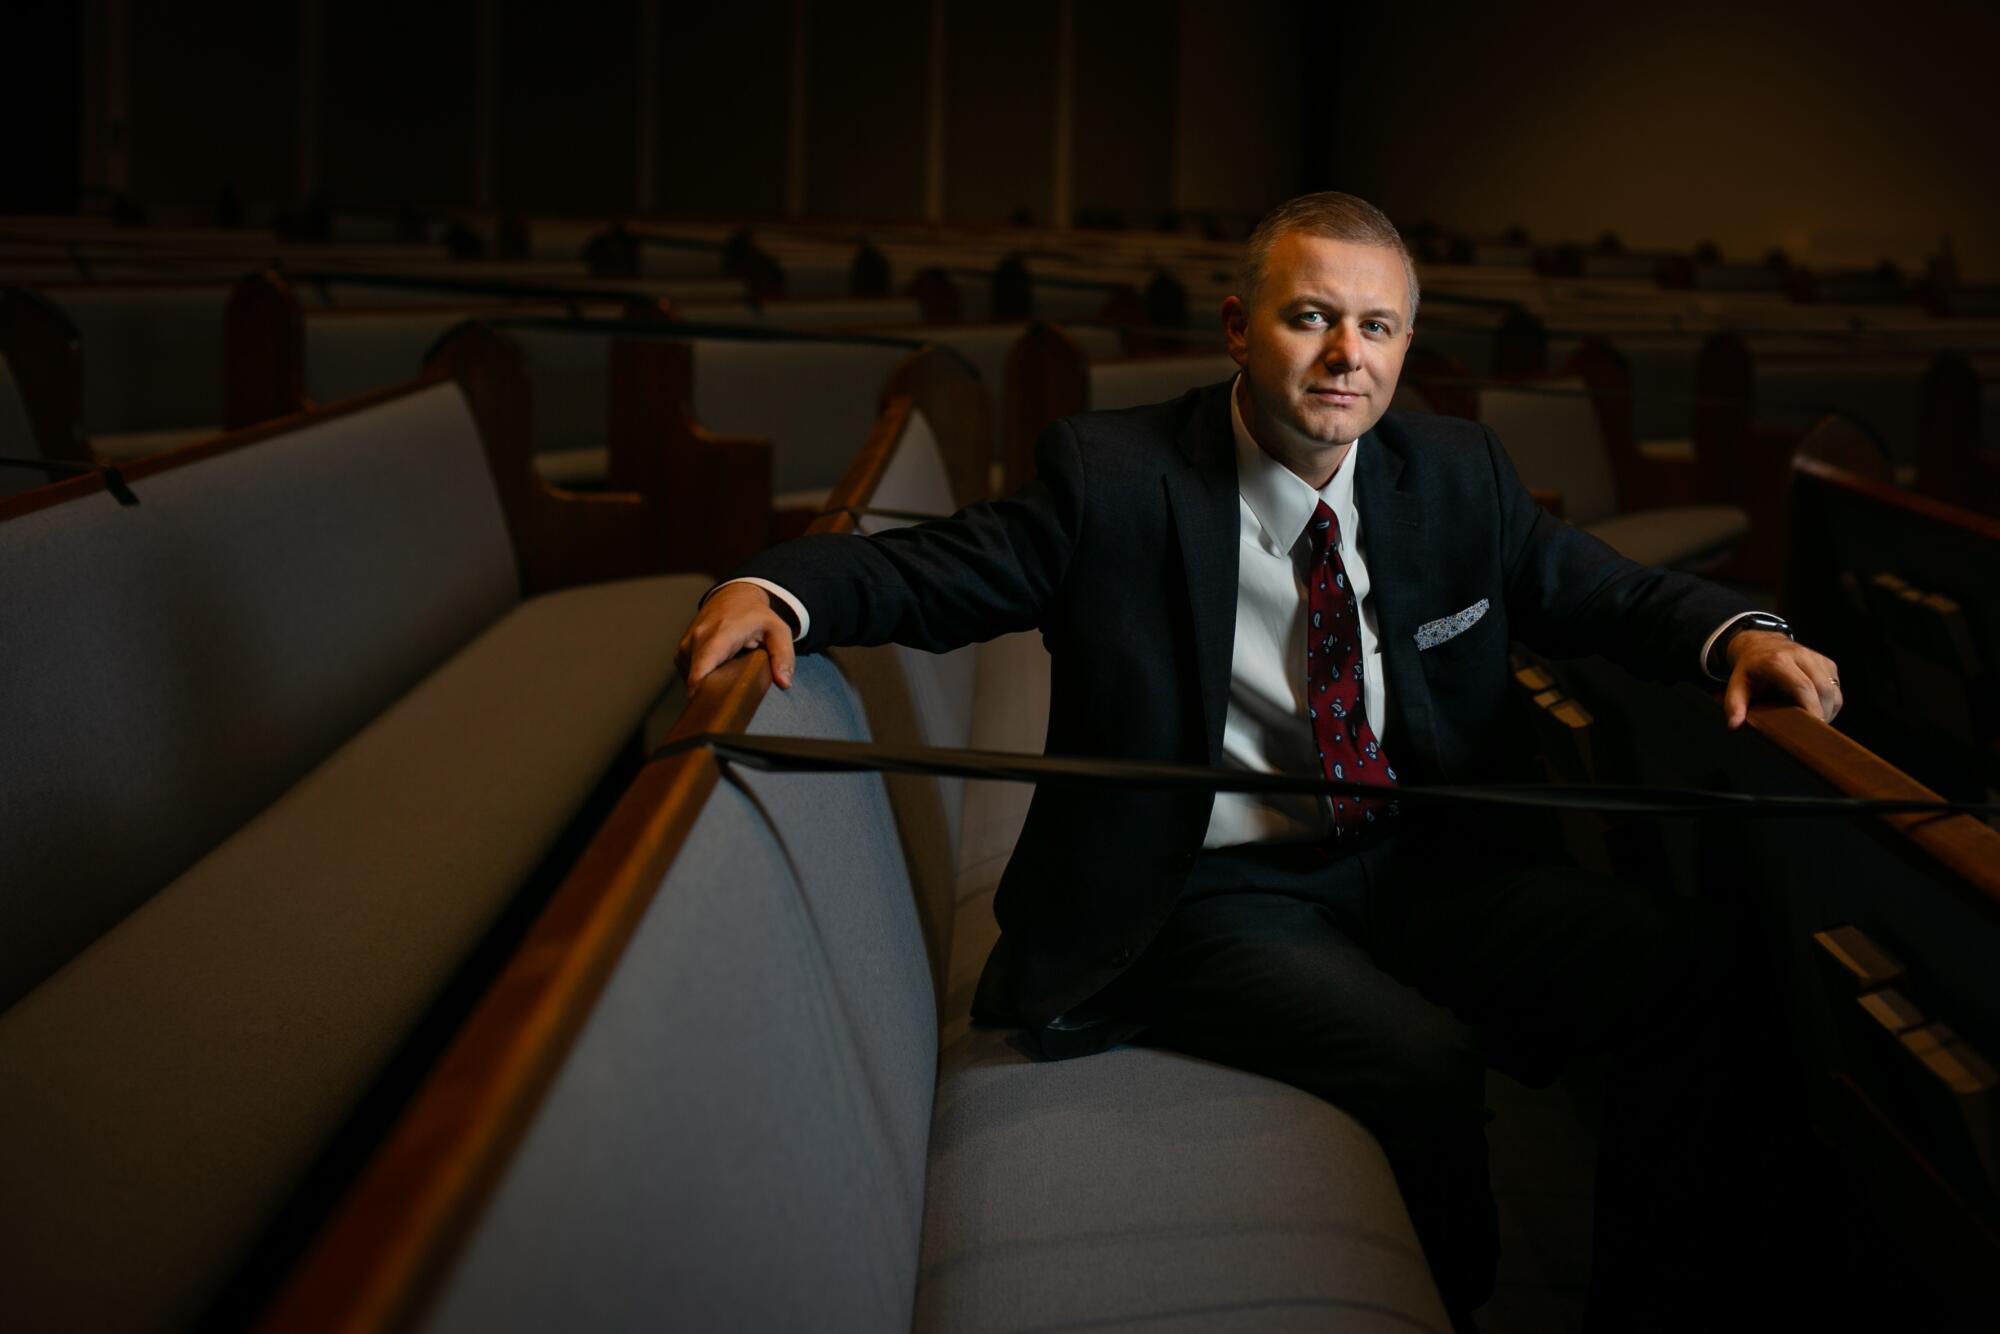 A man in a suit sits for a portrait on a padded church pew.